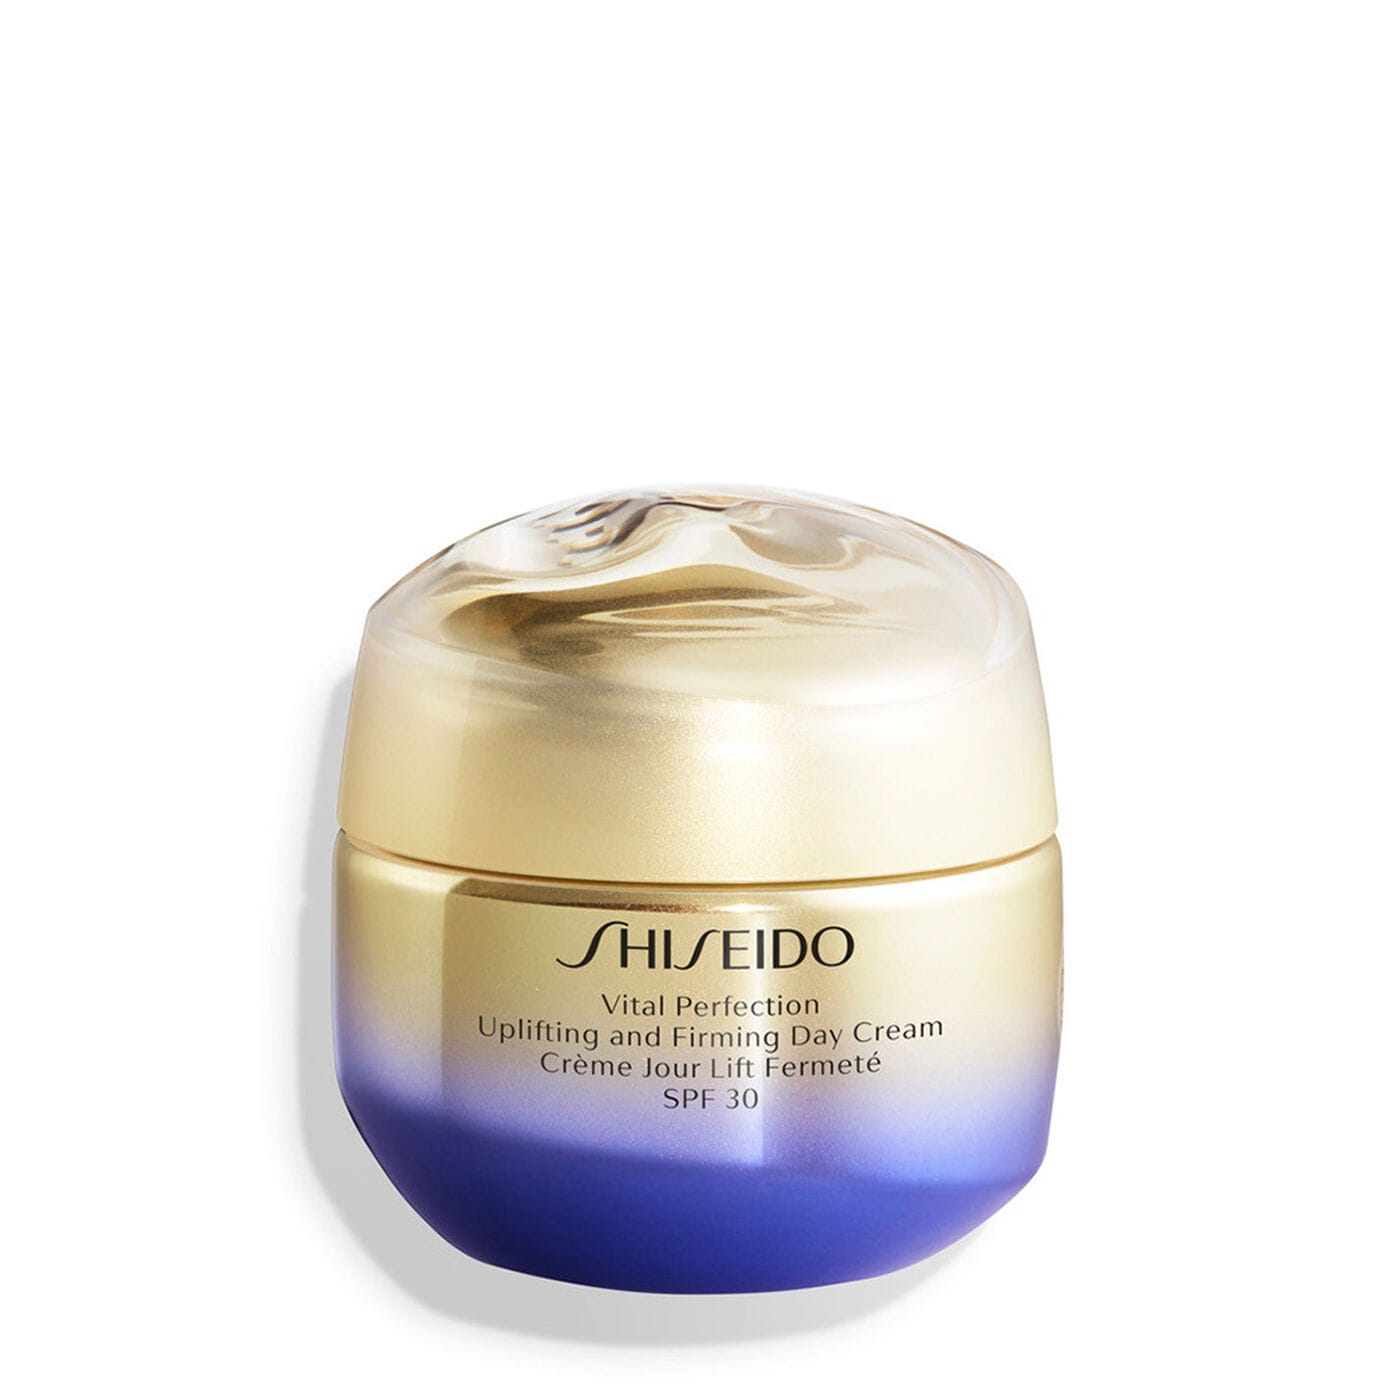 Shiseido-Uplifting and Firming Day Cream SPF30